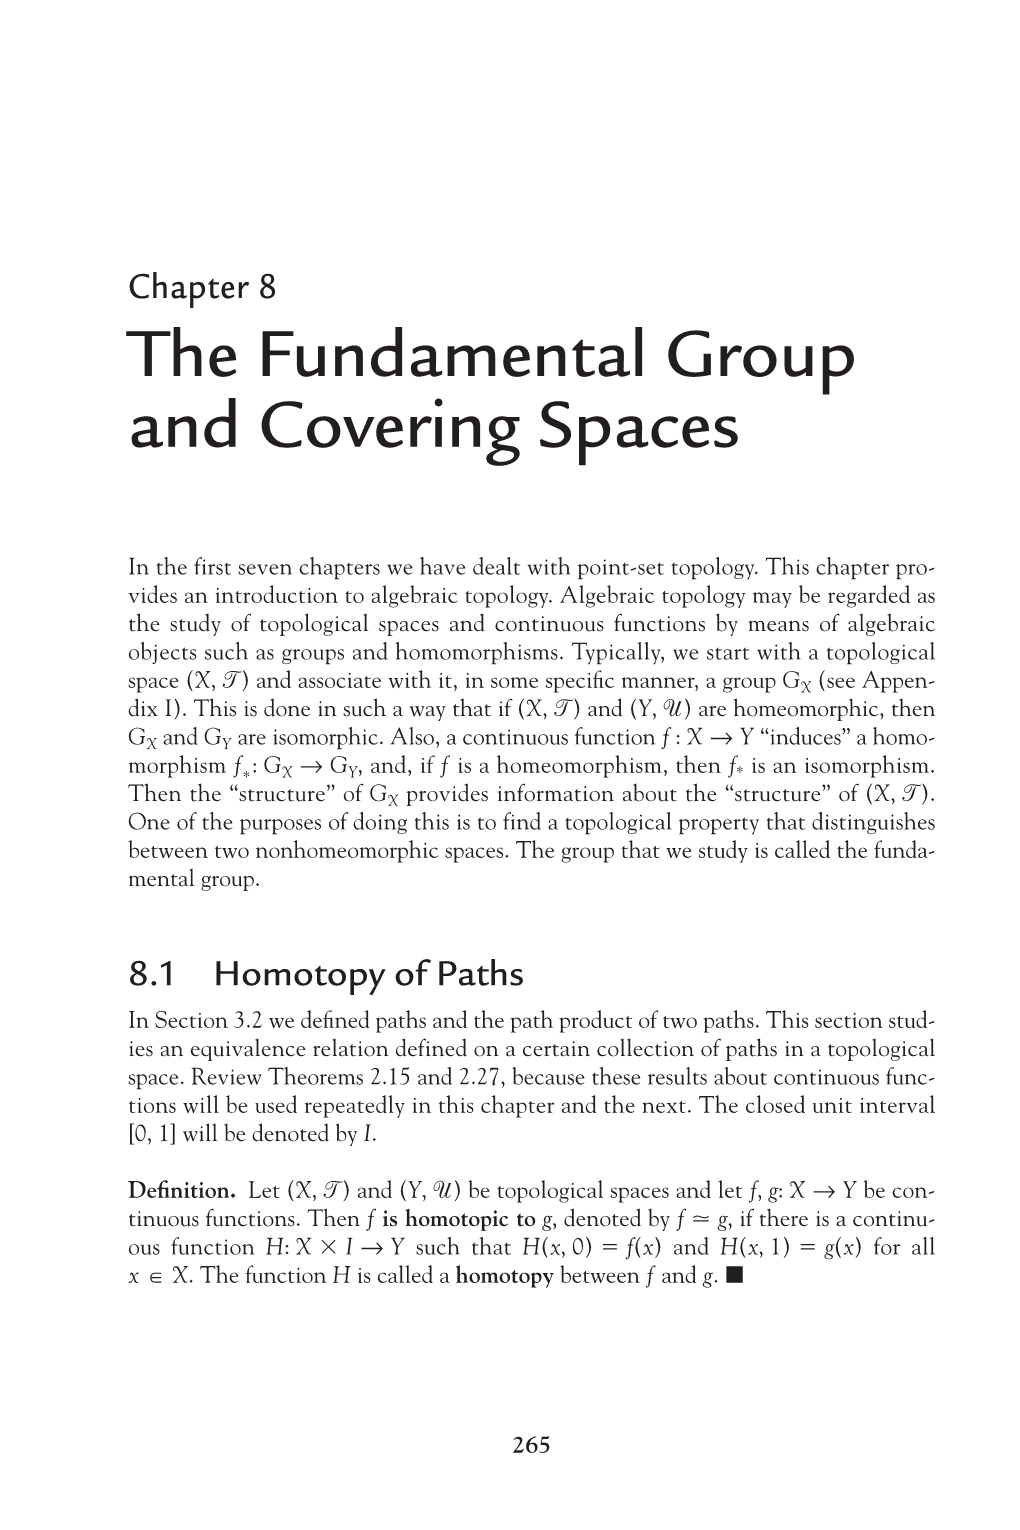 Chapter 8 the Fundamental Group and Covering Spaces